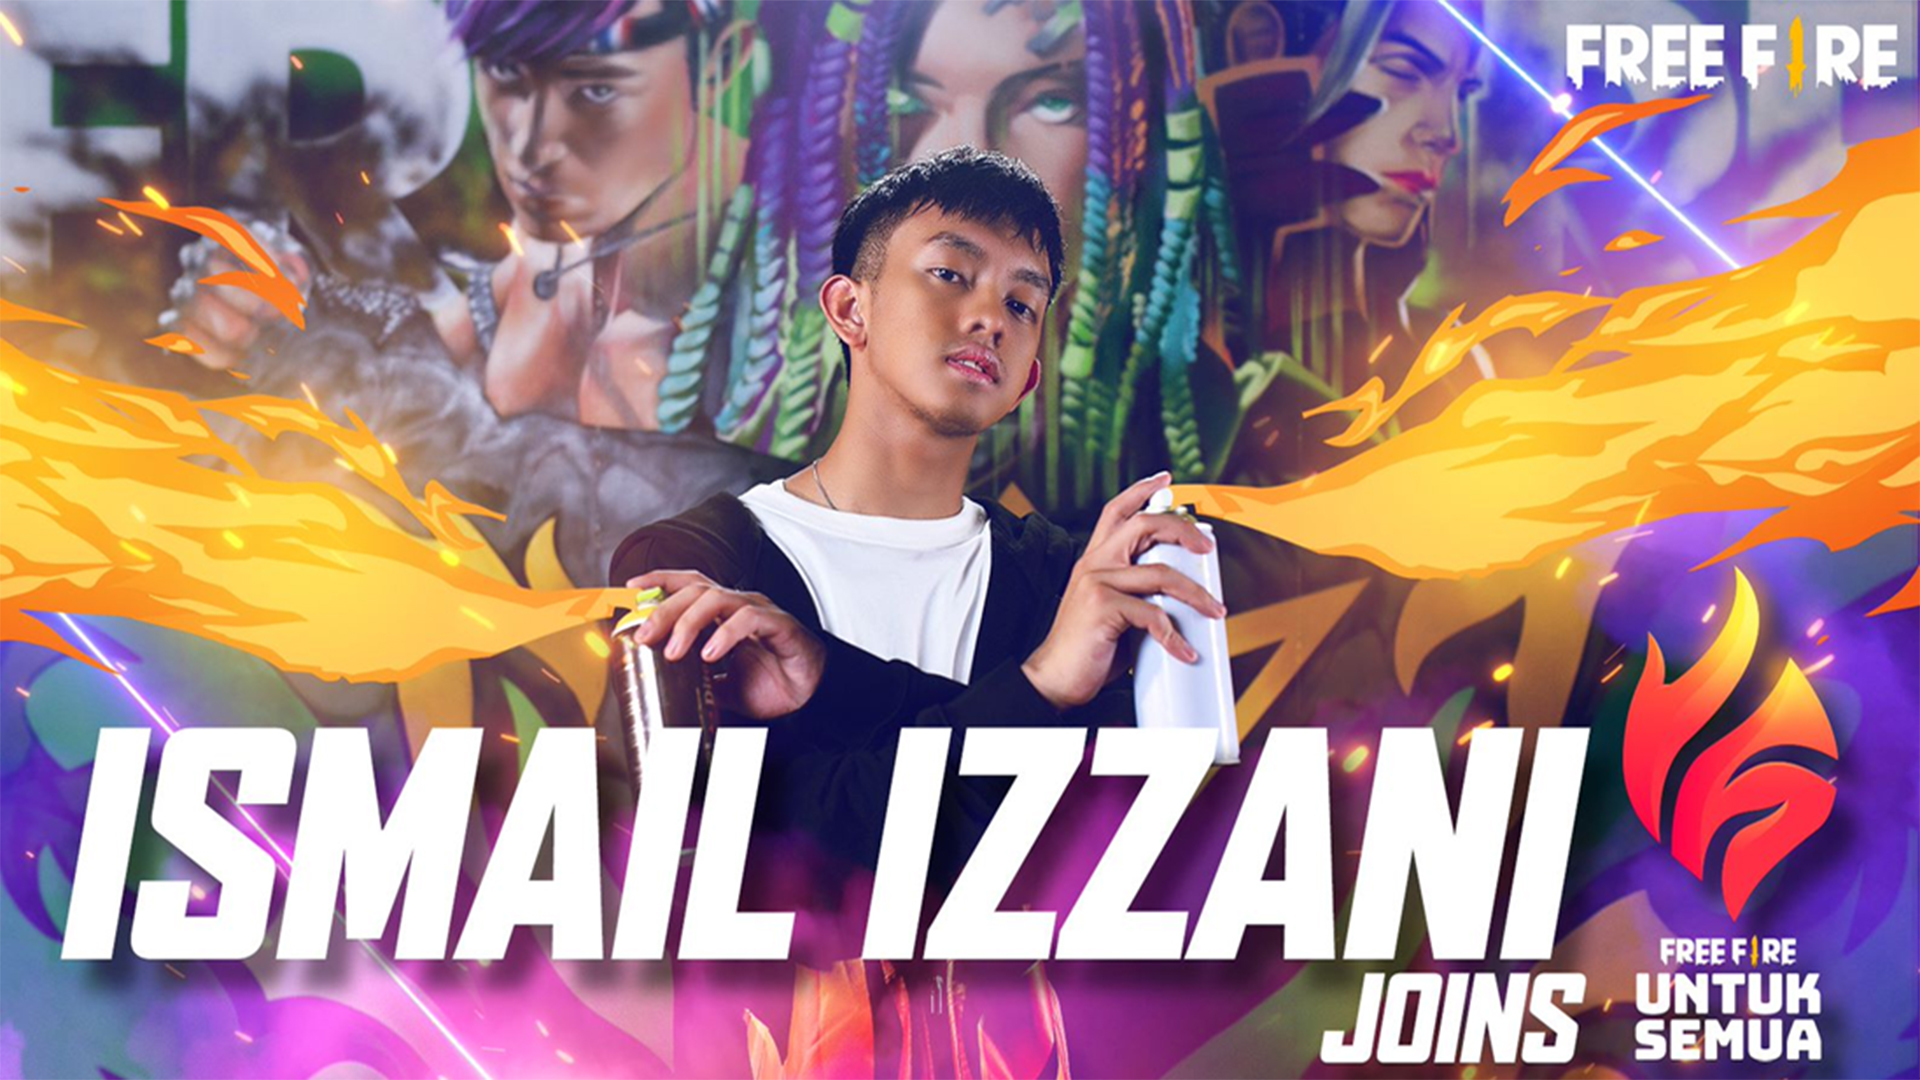 Garena Partners With Singer Ismail Izzani To Celebrate 